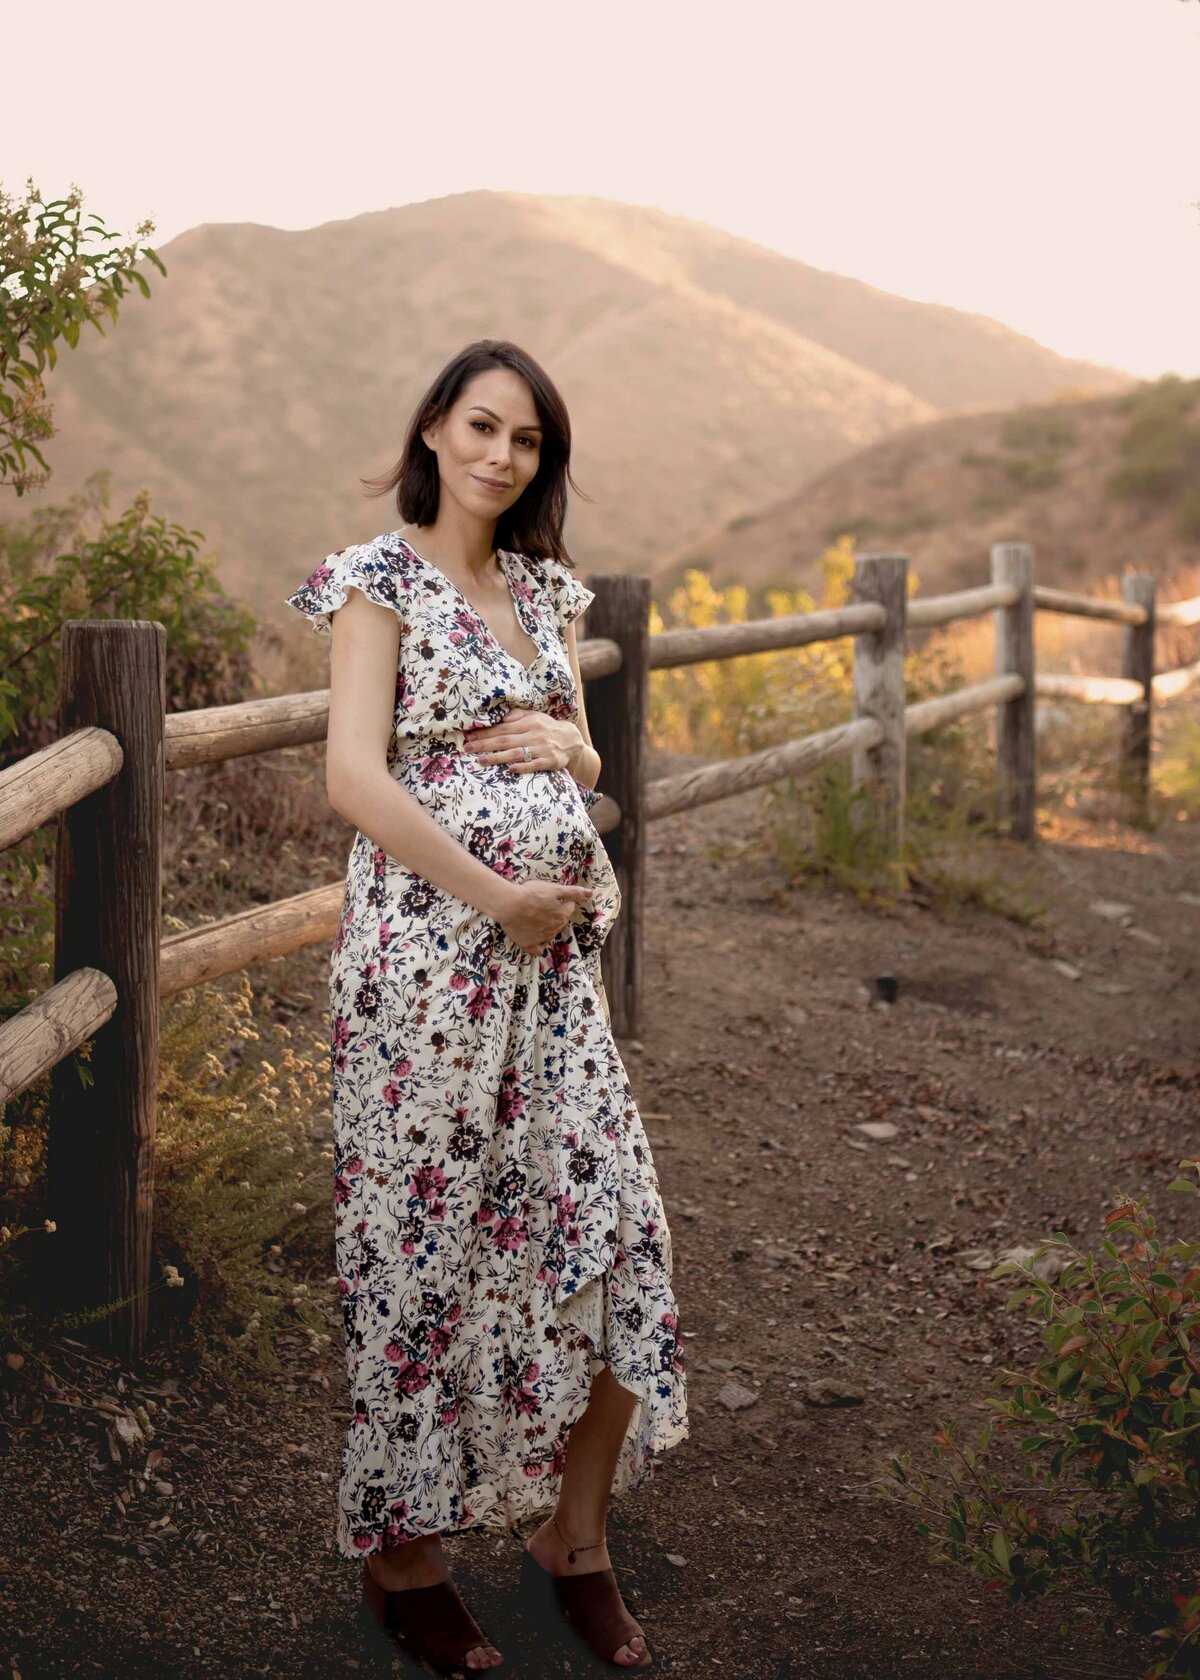 Expectant Mom in long, floral dress smiling at the camera with the Elsinore mountains in the distance.